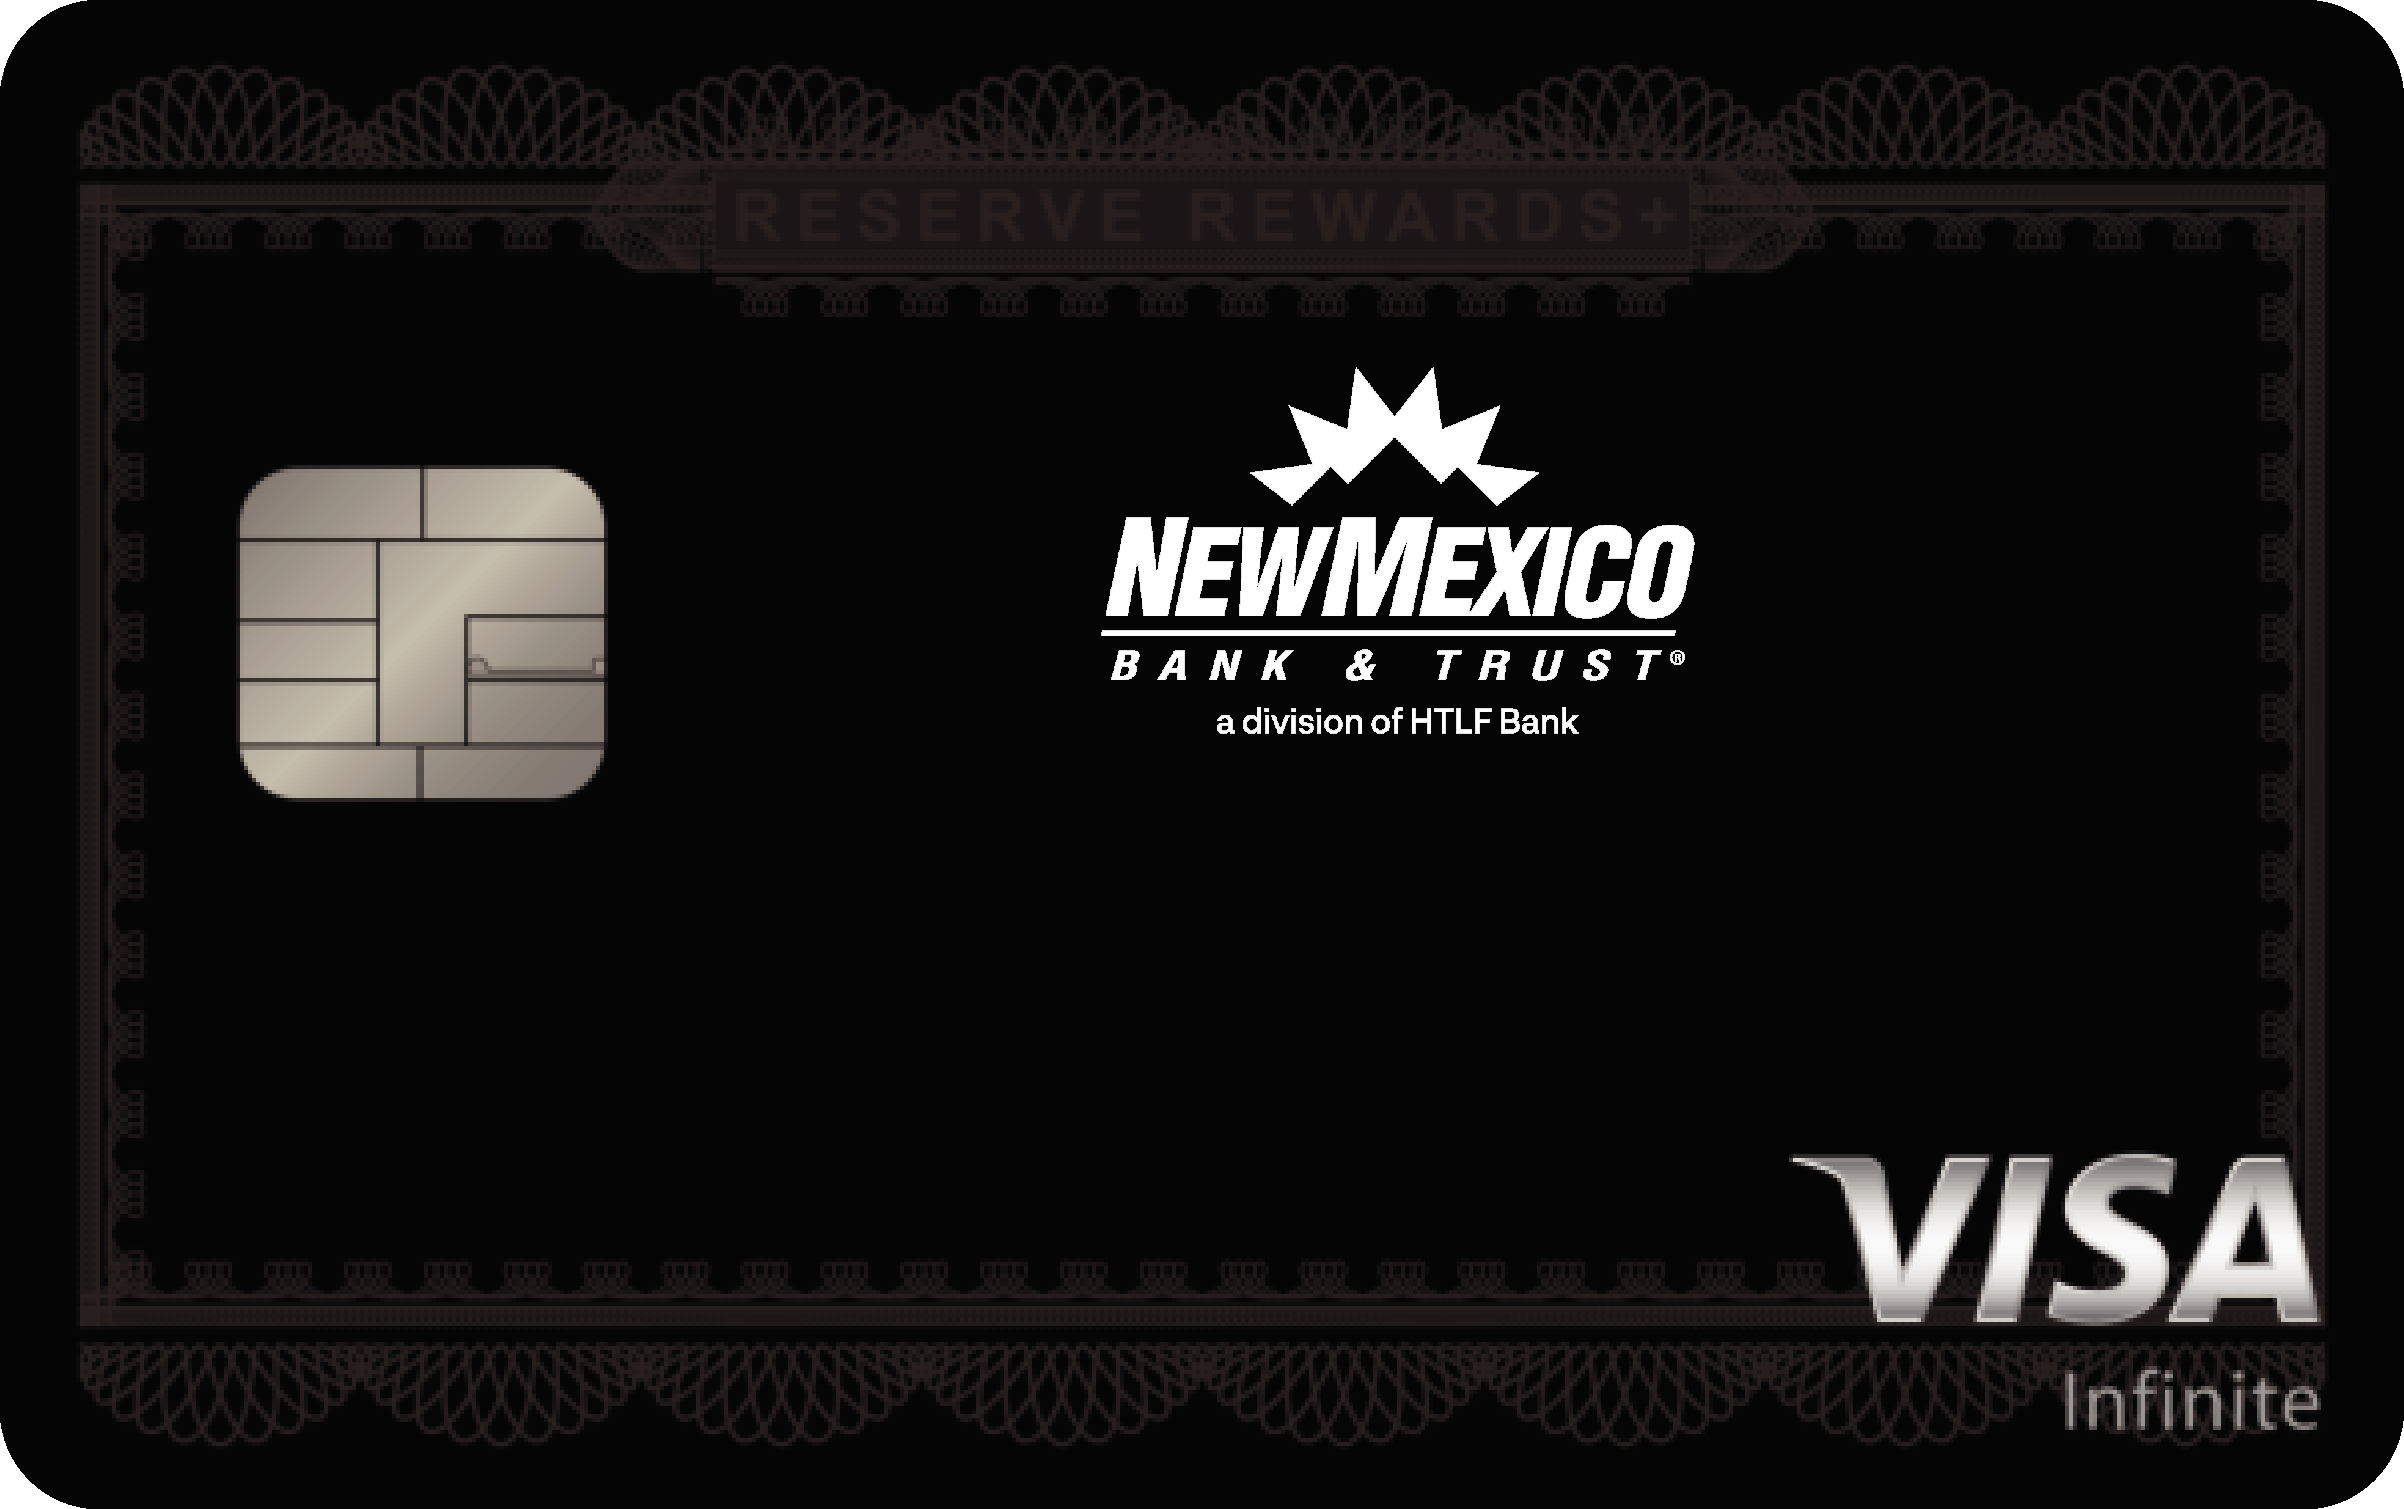 New Mexico Bank & Trust Reserve Rewards+ Card